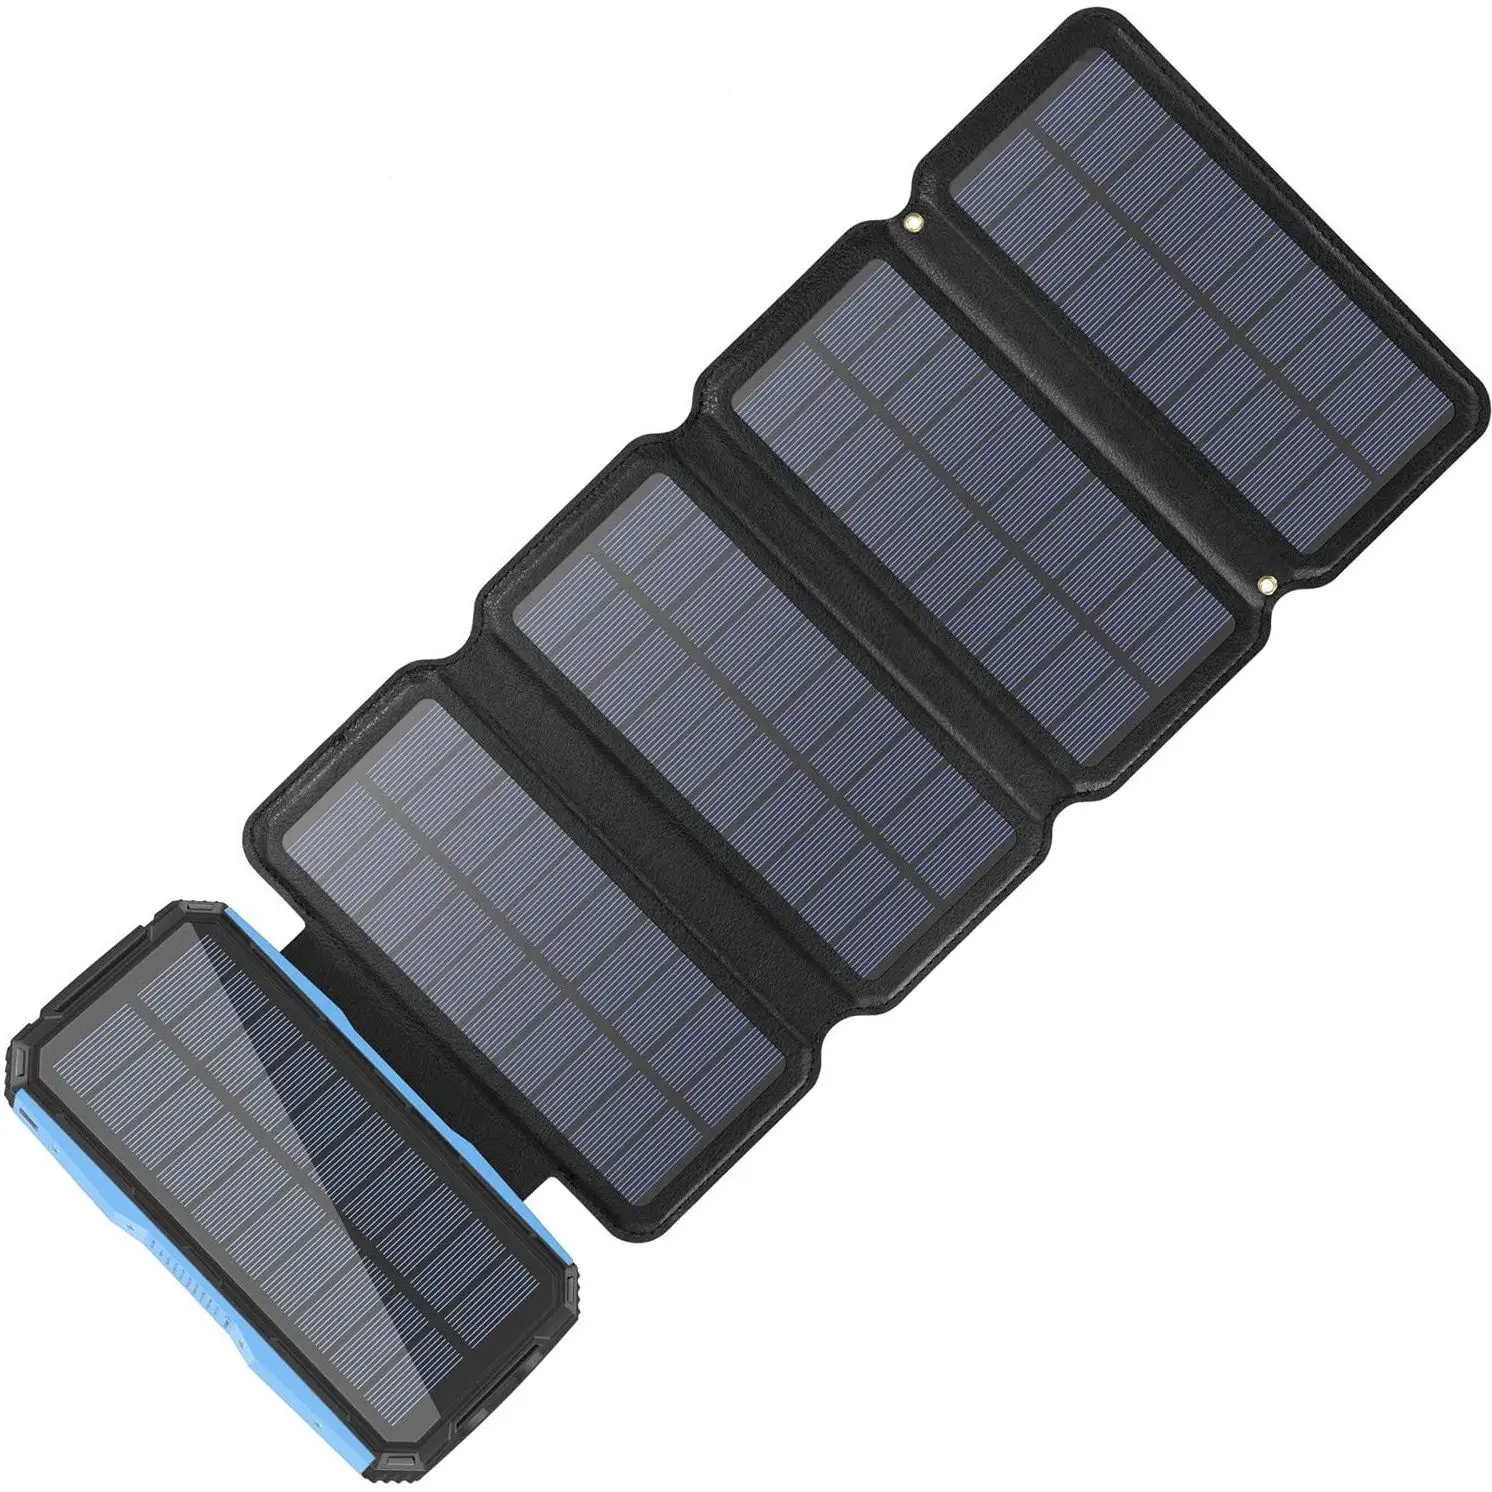 

Solar Charger 26800mAh 5 Panels 7.5W High Efficiency With Ultra Bright 60-LED Panel Light and Flashlight PD Portable Power Ban